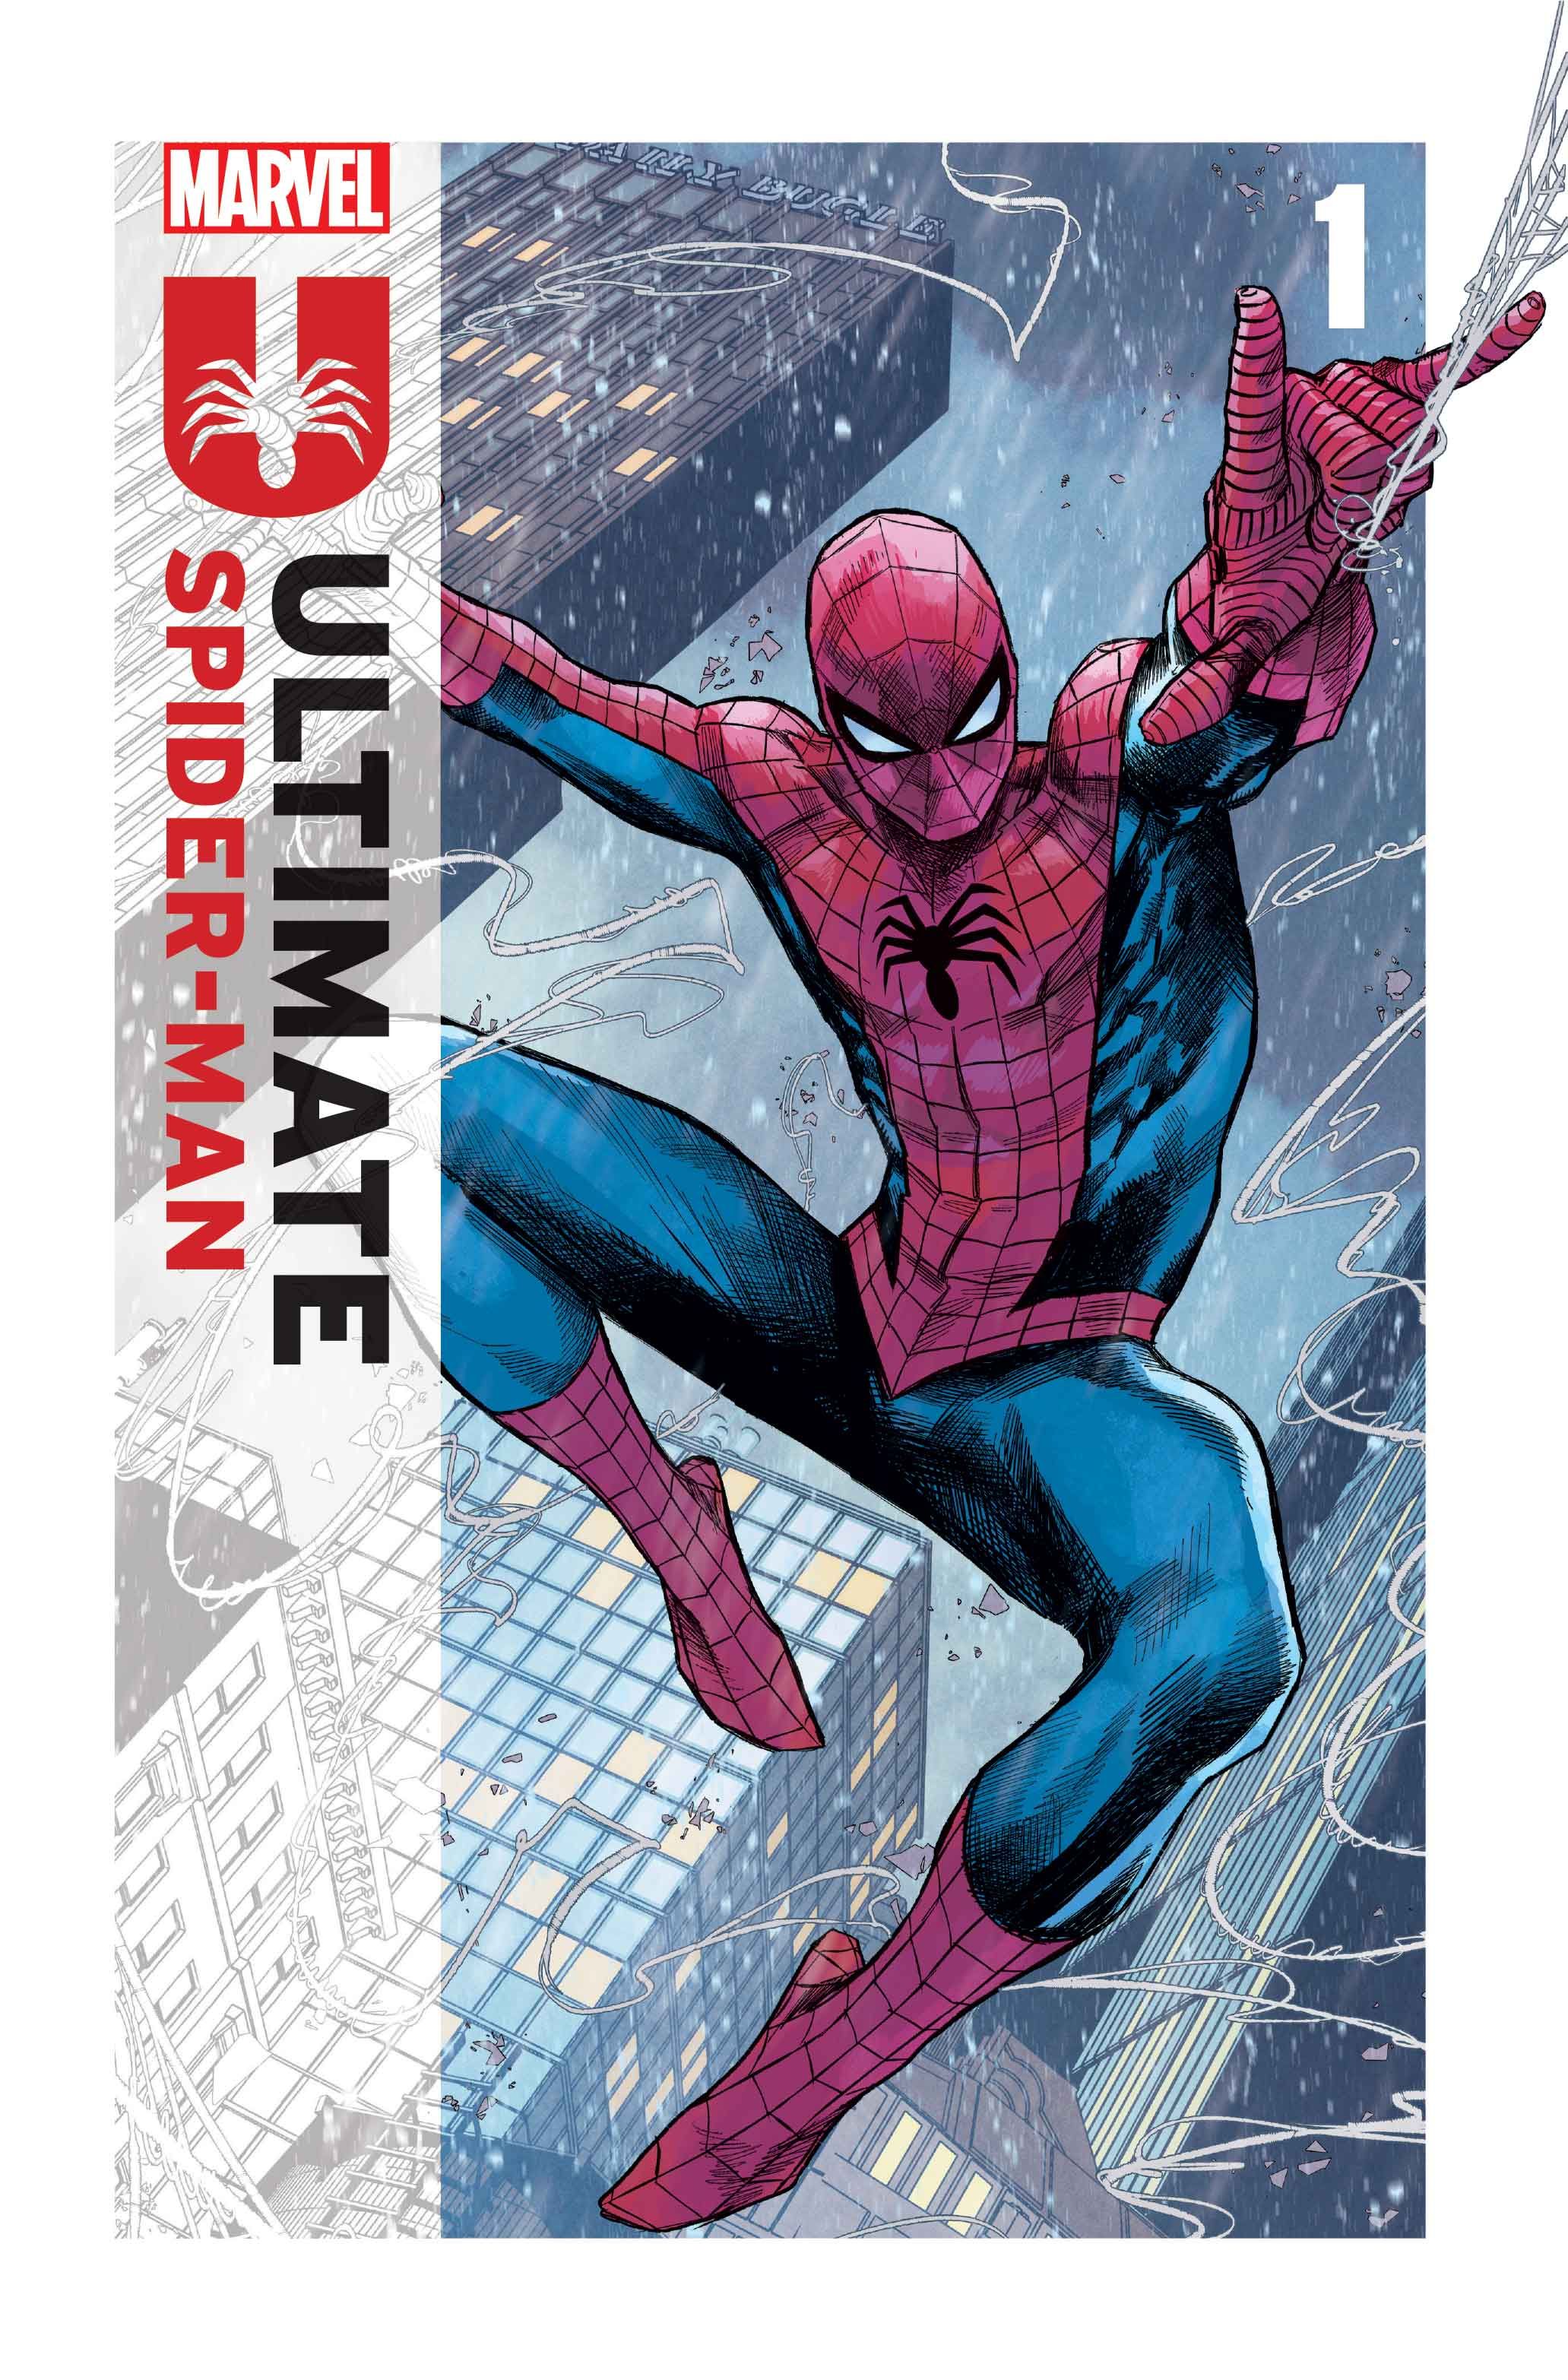 The cover of Ultimate Spider-Man #1